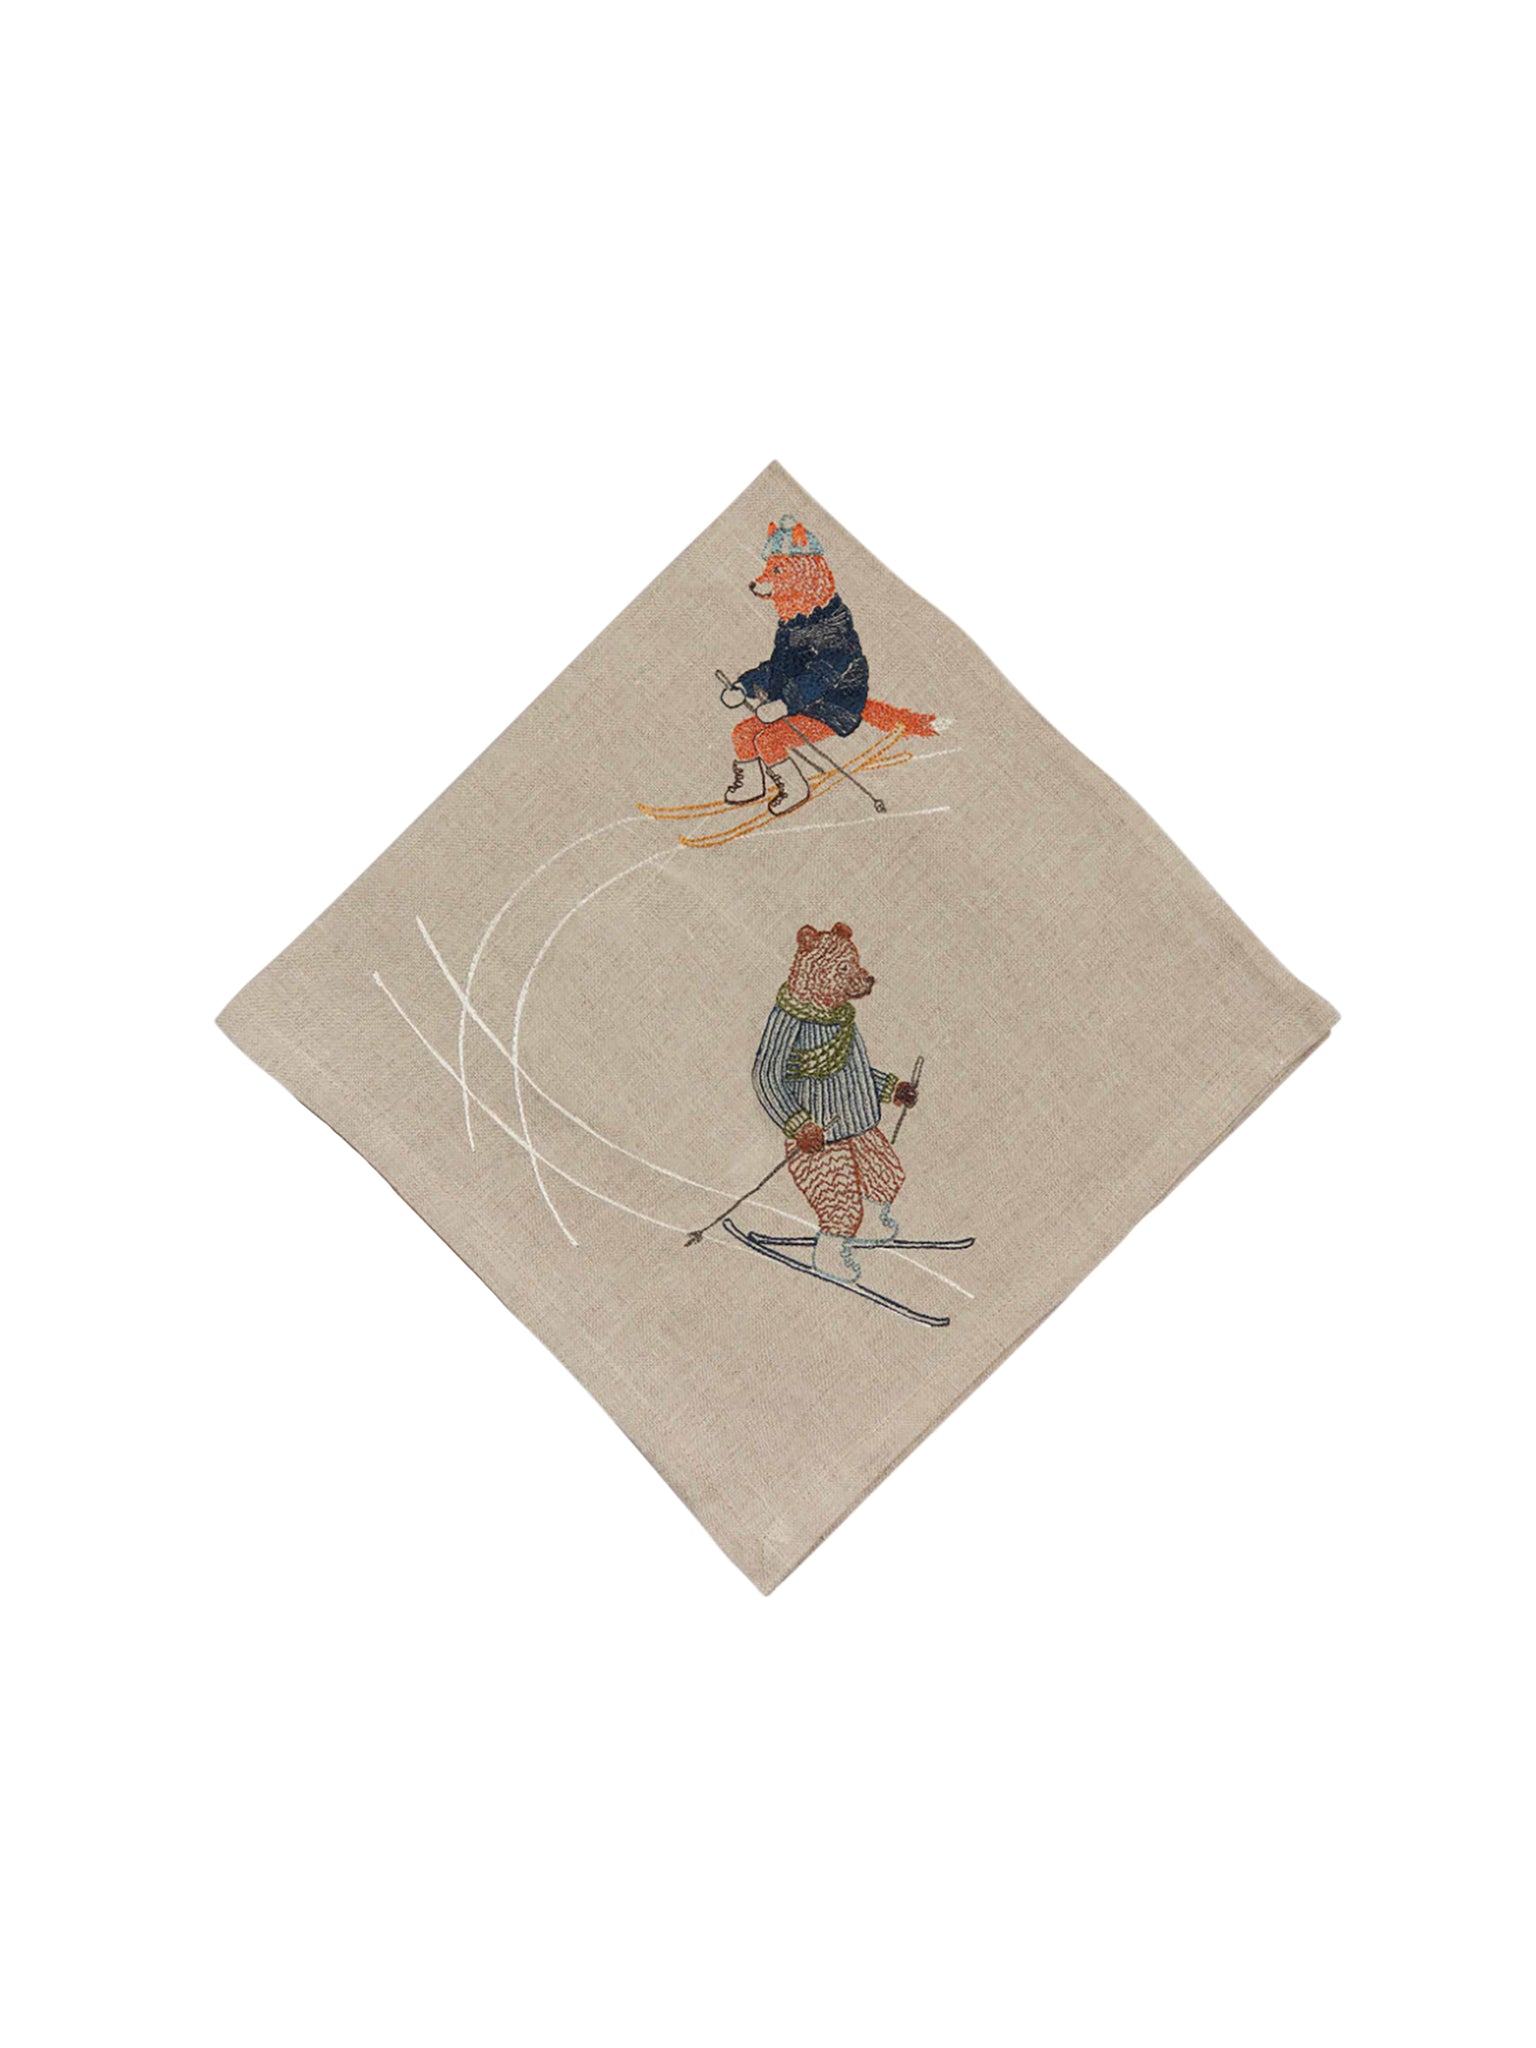 Coral & Tusk Downhill Skiers Dinner Napkins Weston Table